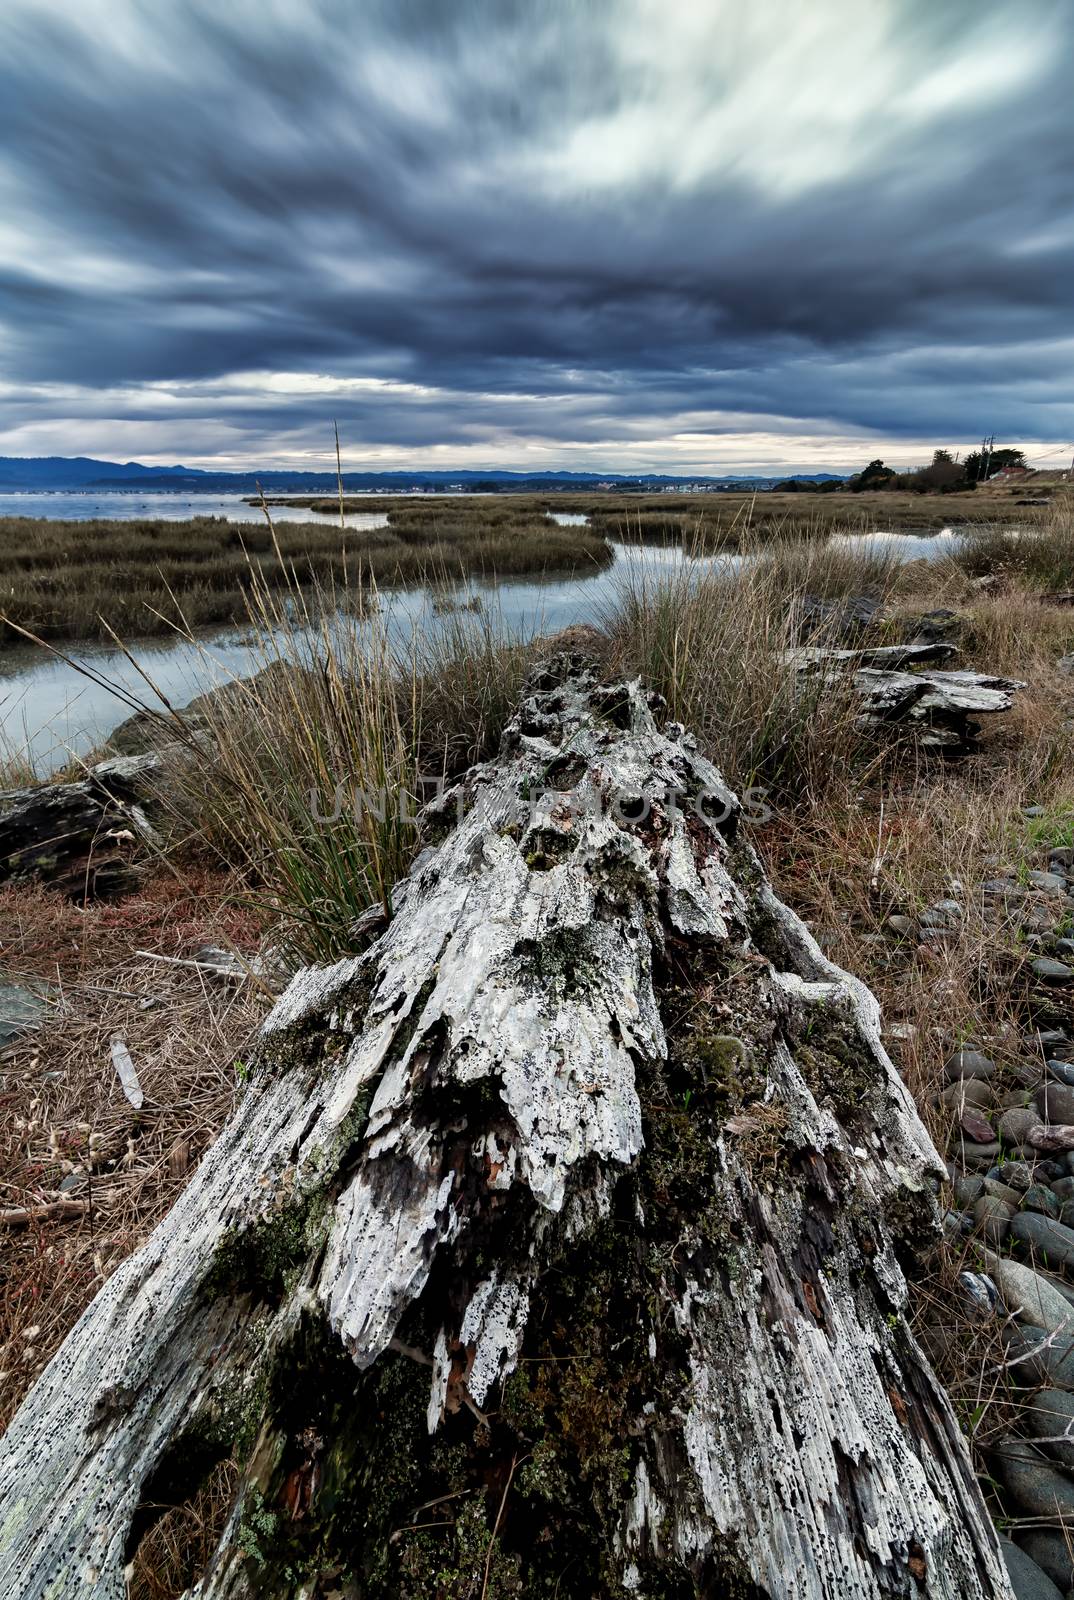 Old weathered log rests along the bay with an approaching rainstorm.